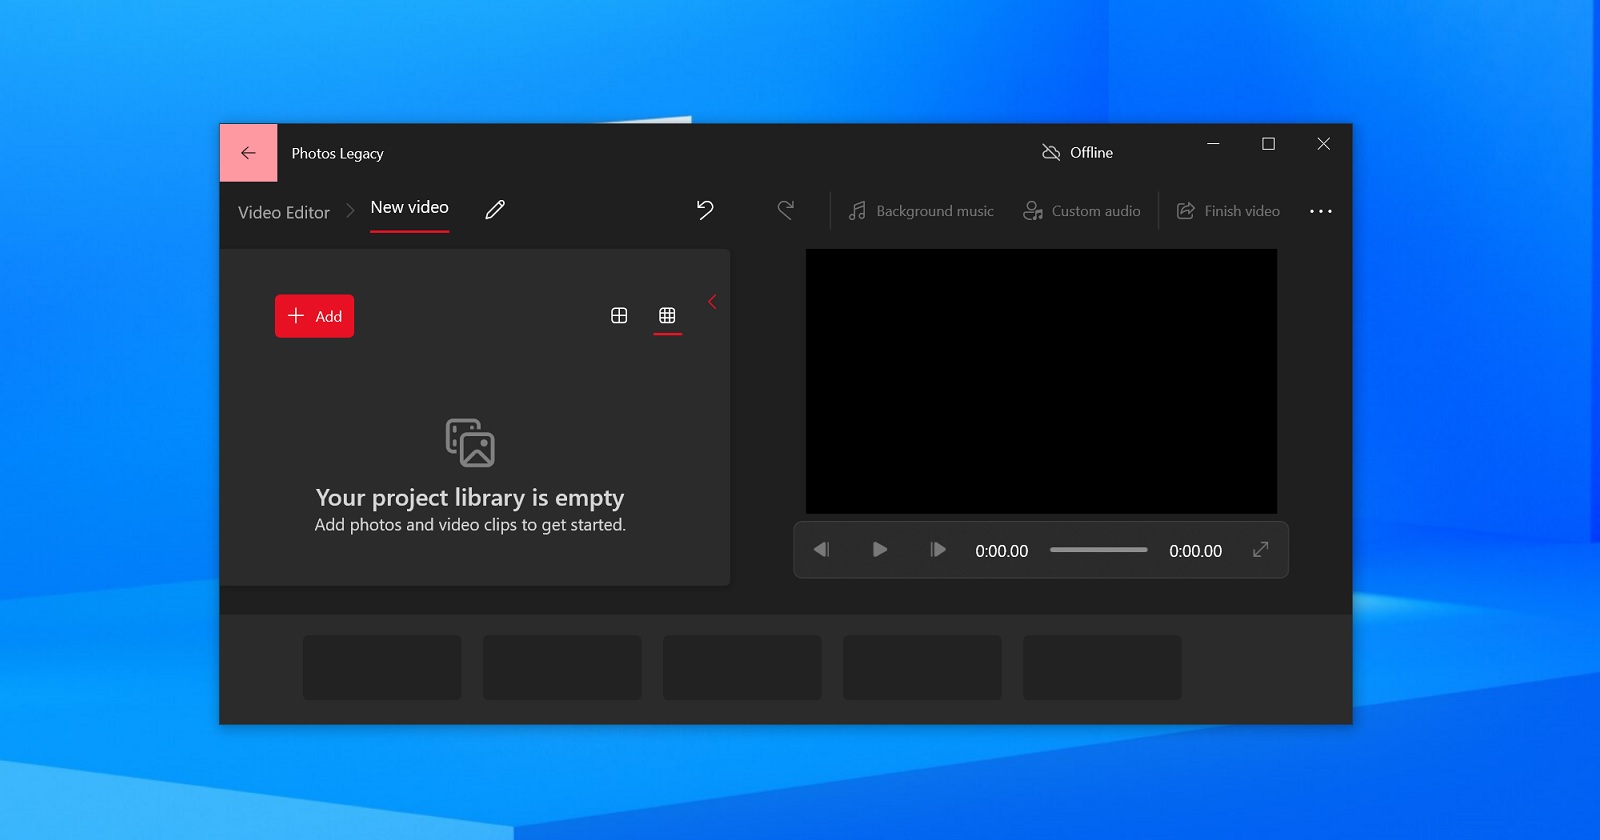 How To Use The Windows 10 Video Editor